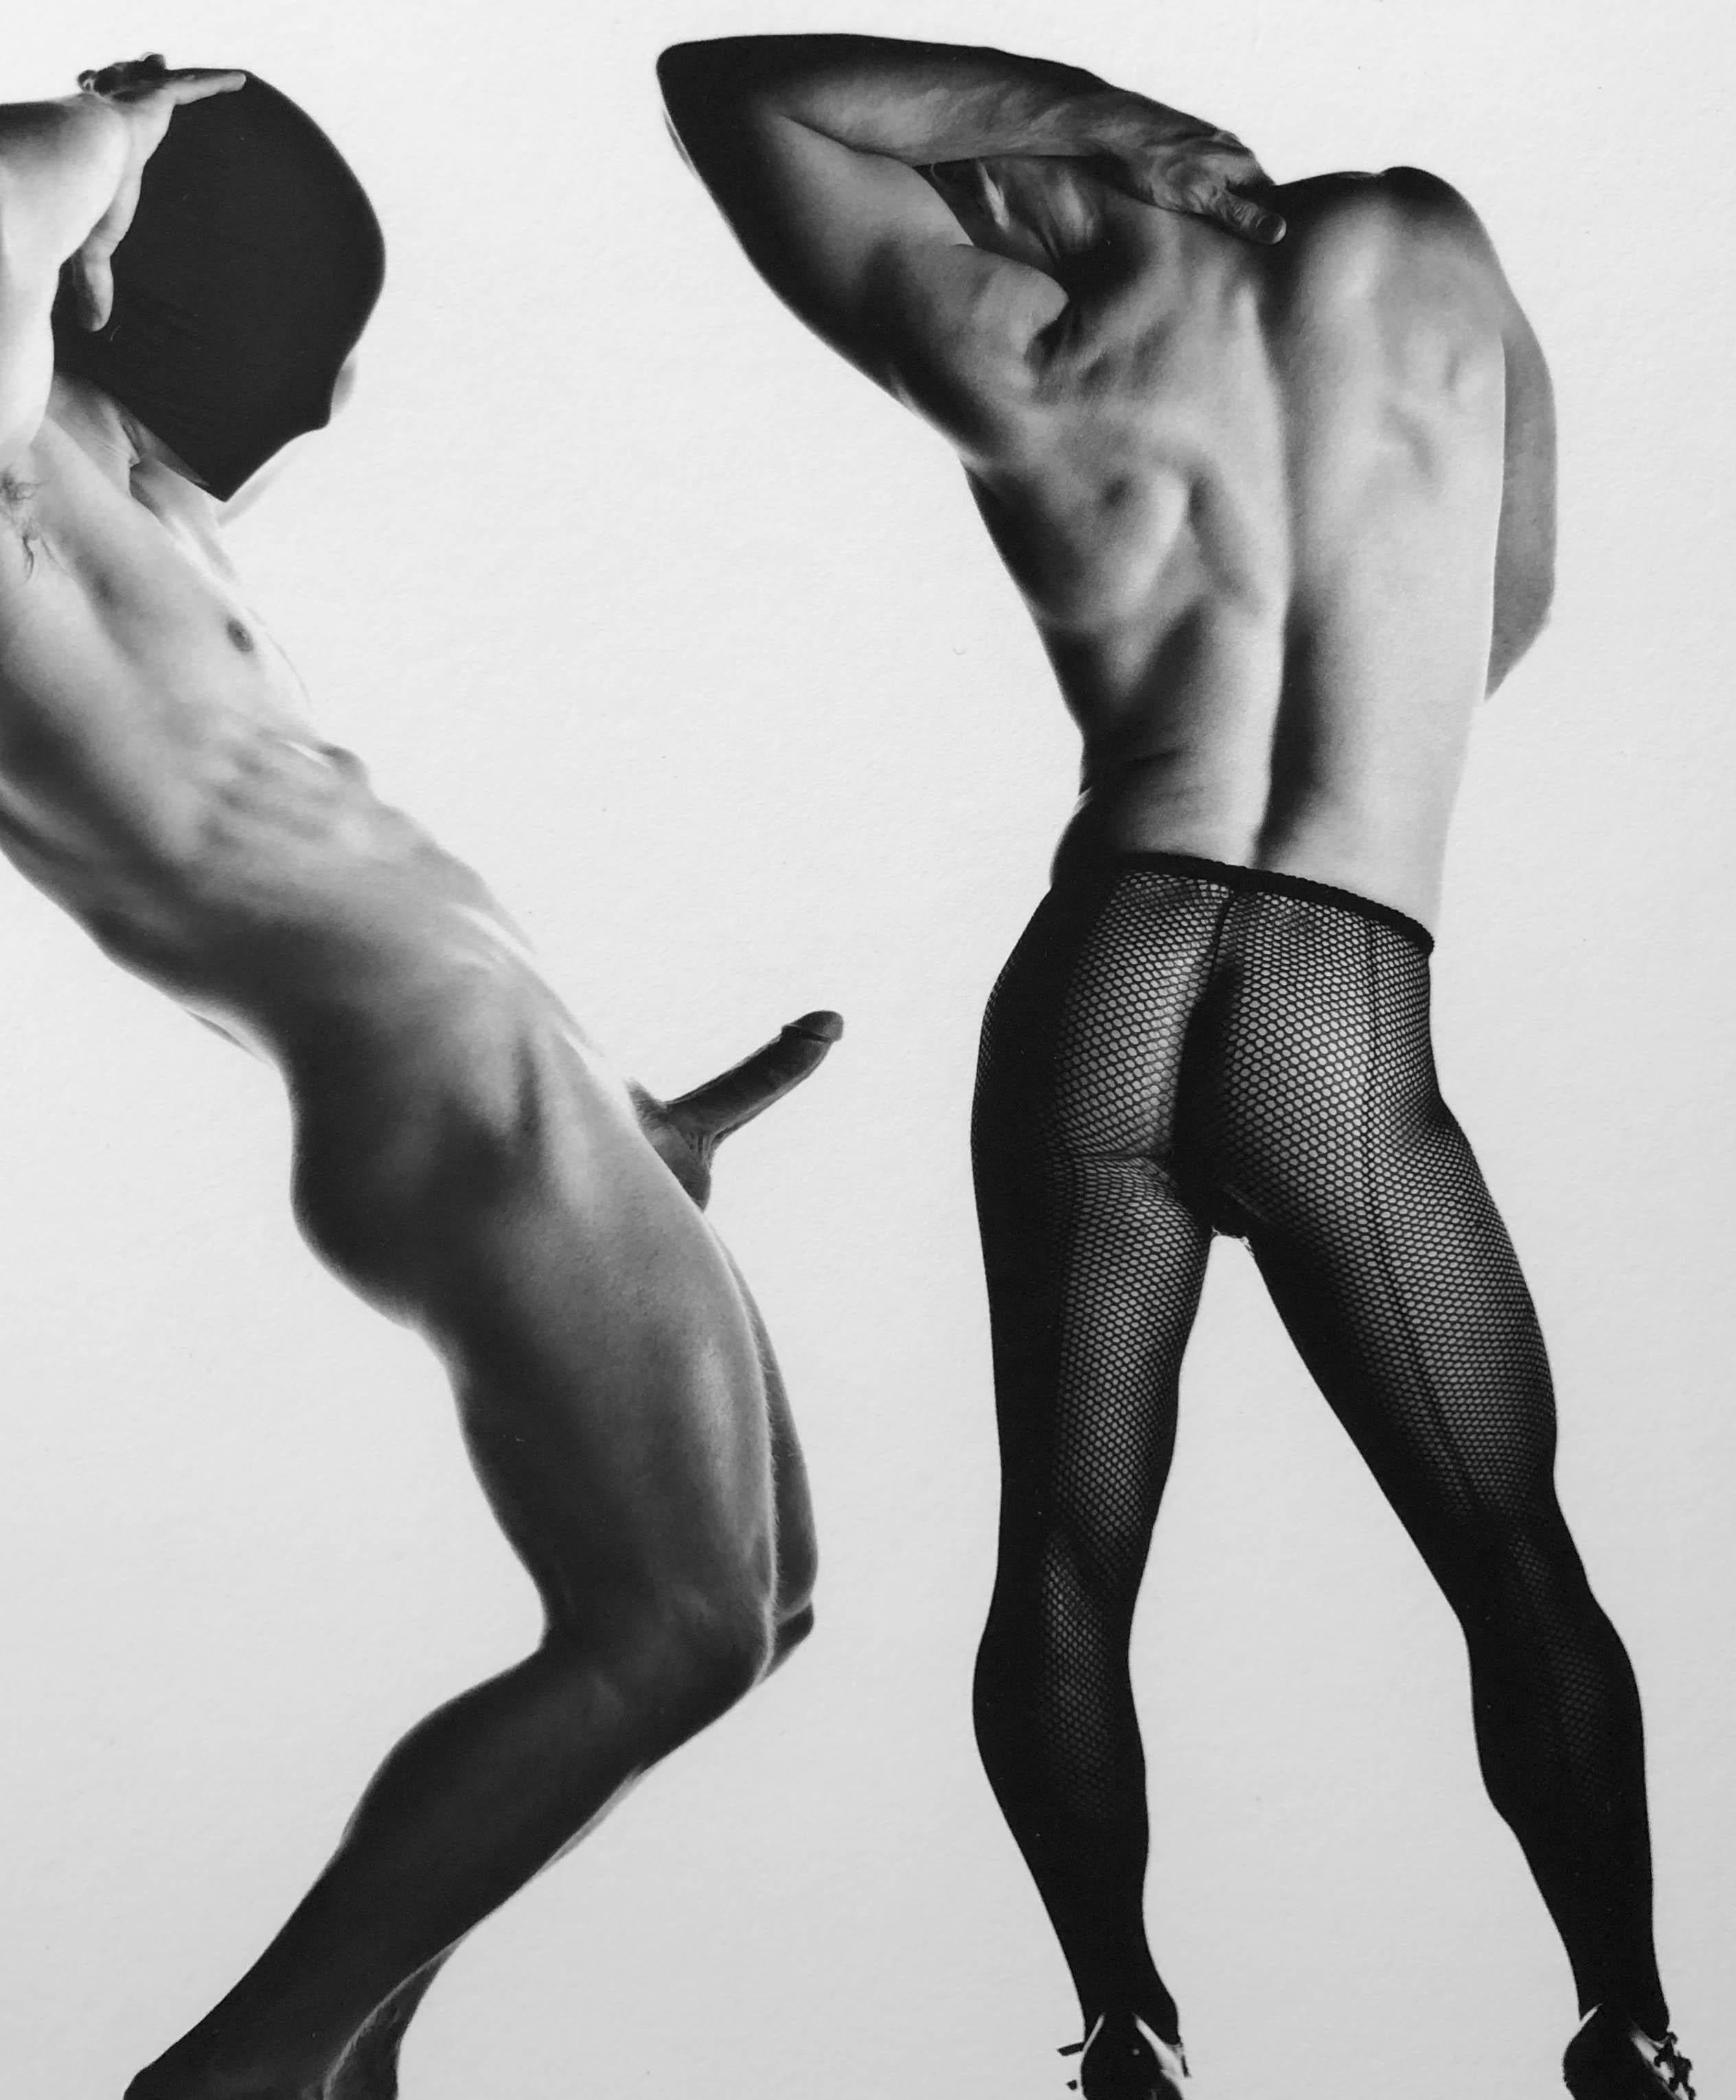 Sex 3 - Erotic Male Photo, Fishnet Stockings and High Heals, Framed - Black Black and White Photograph by Doug Birkenheuer